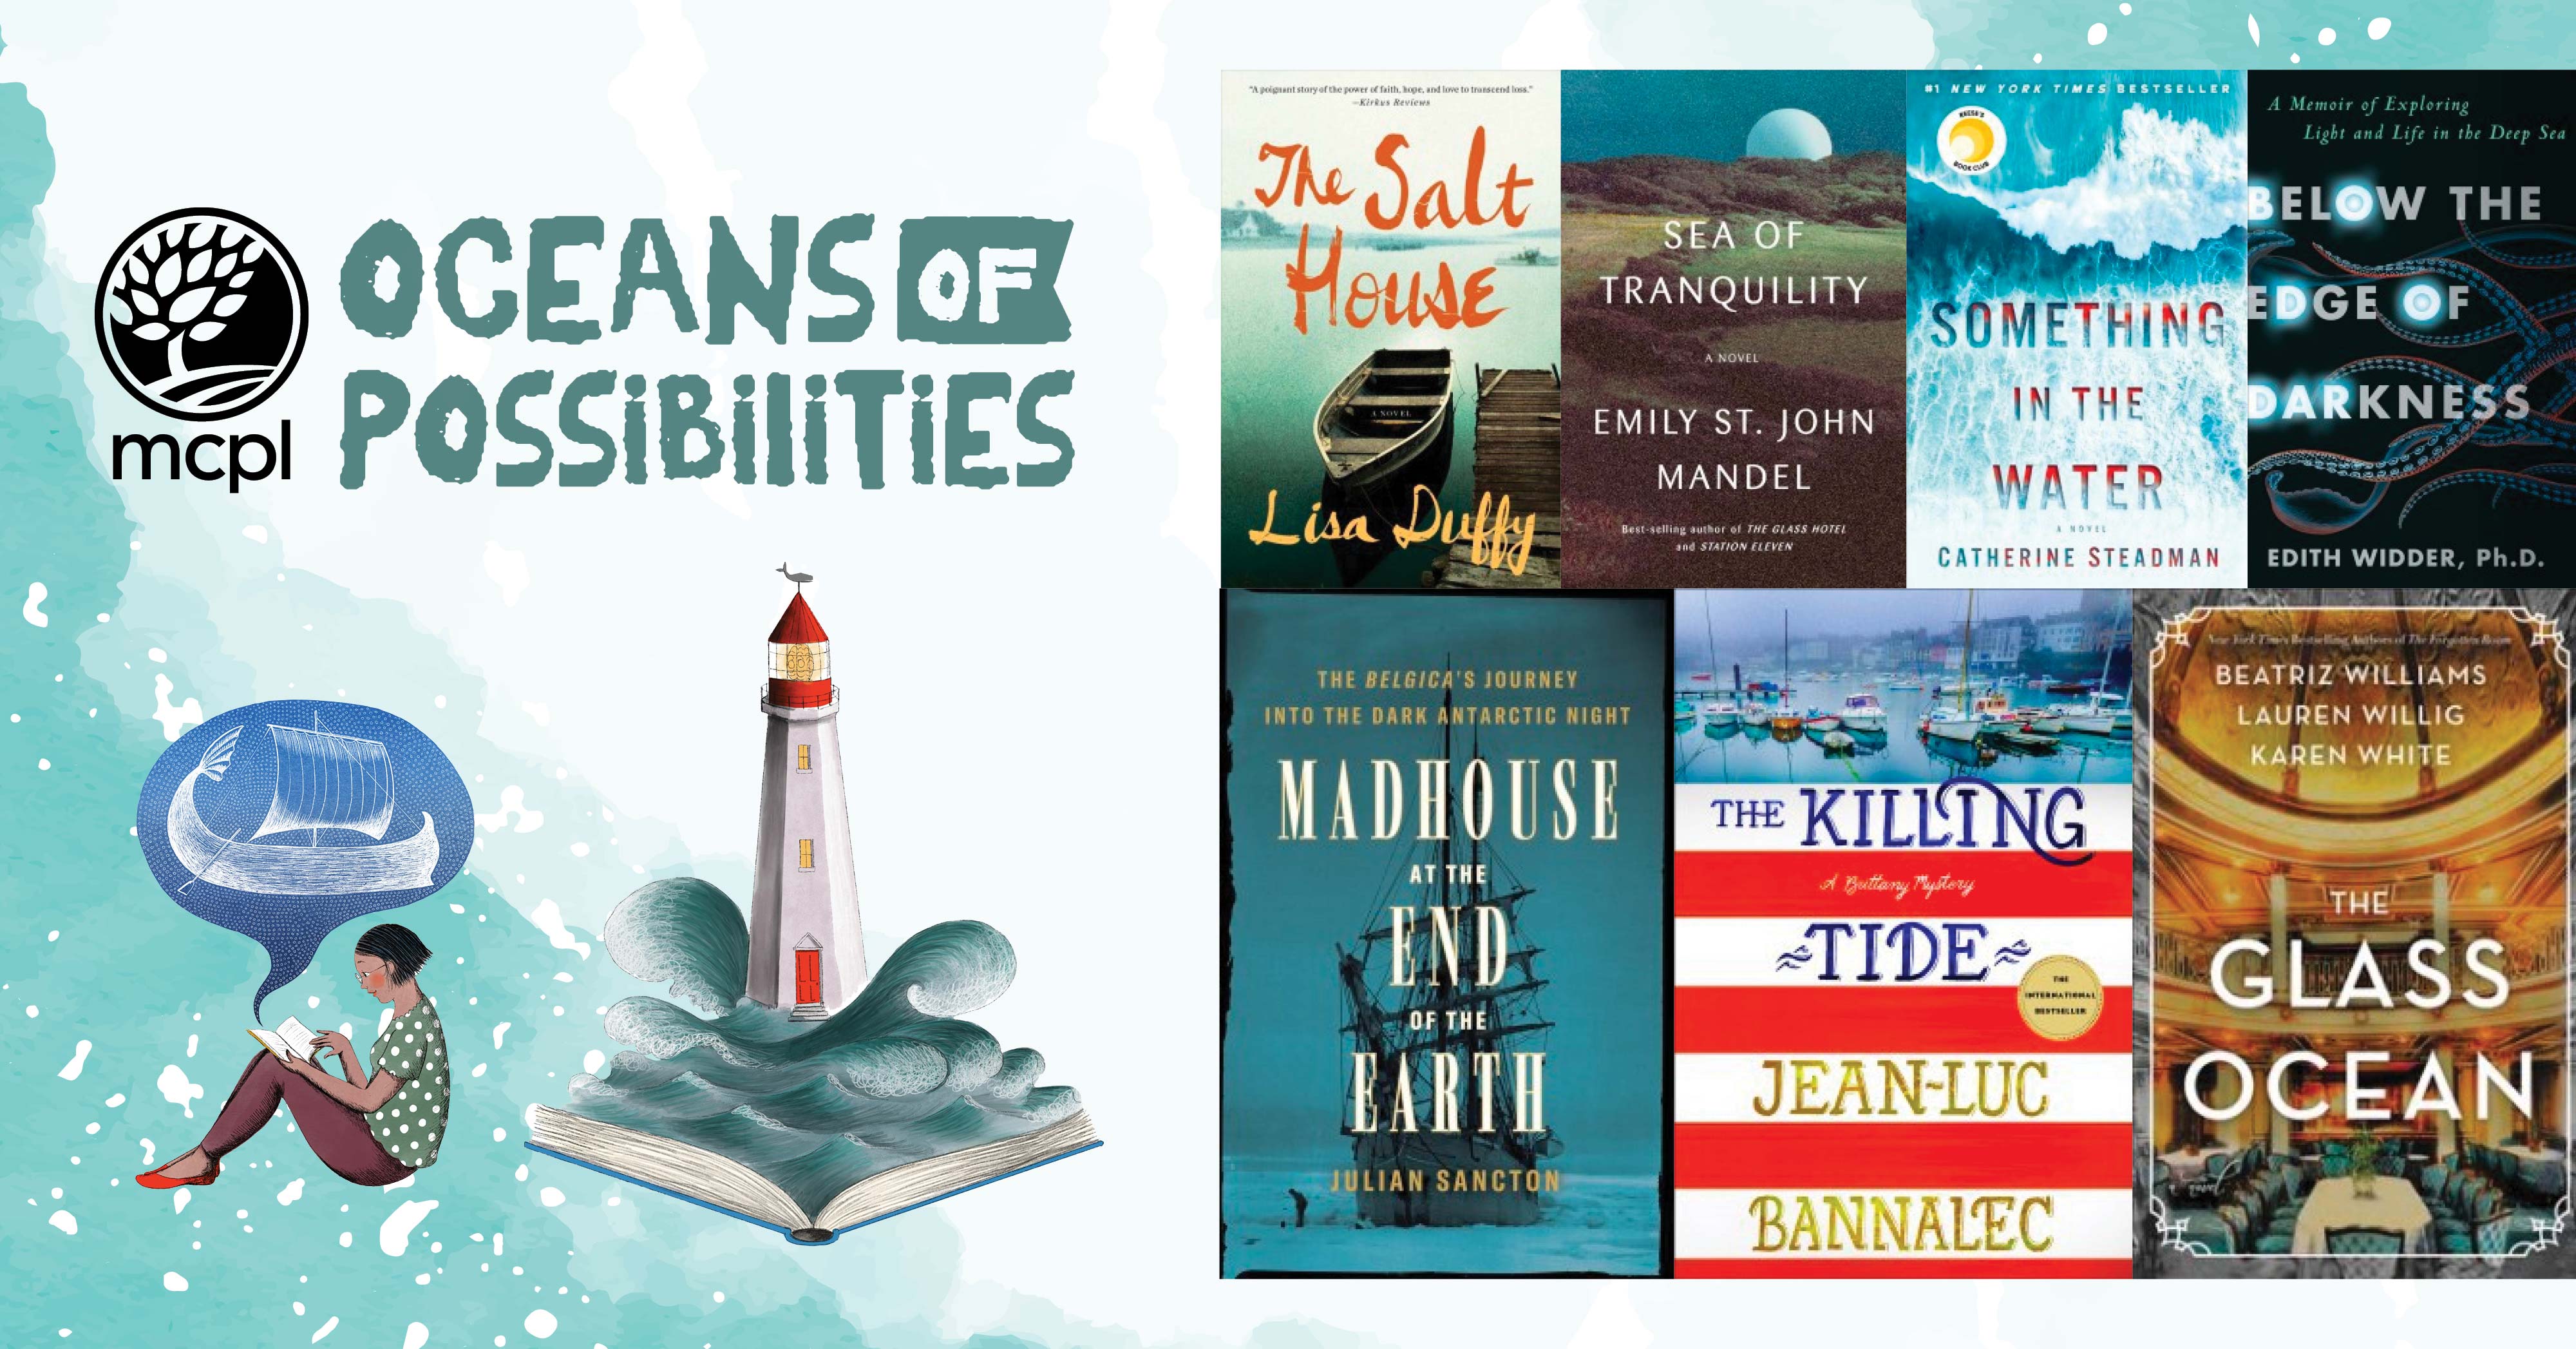 A collage of book titles from the list with the title "Oceans of Possibilities", illustrations of a person reading and a lighthouse emerging from the book. 